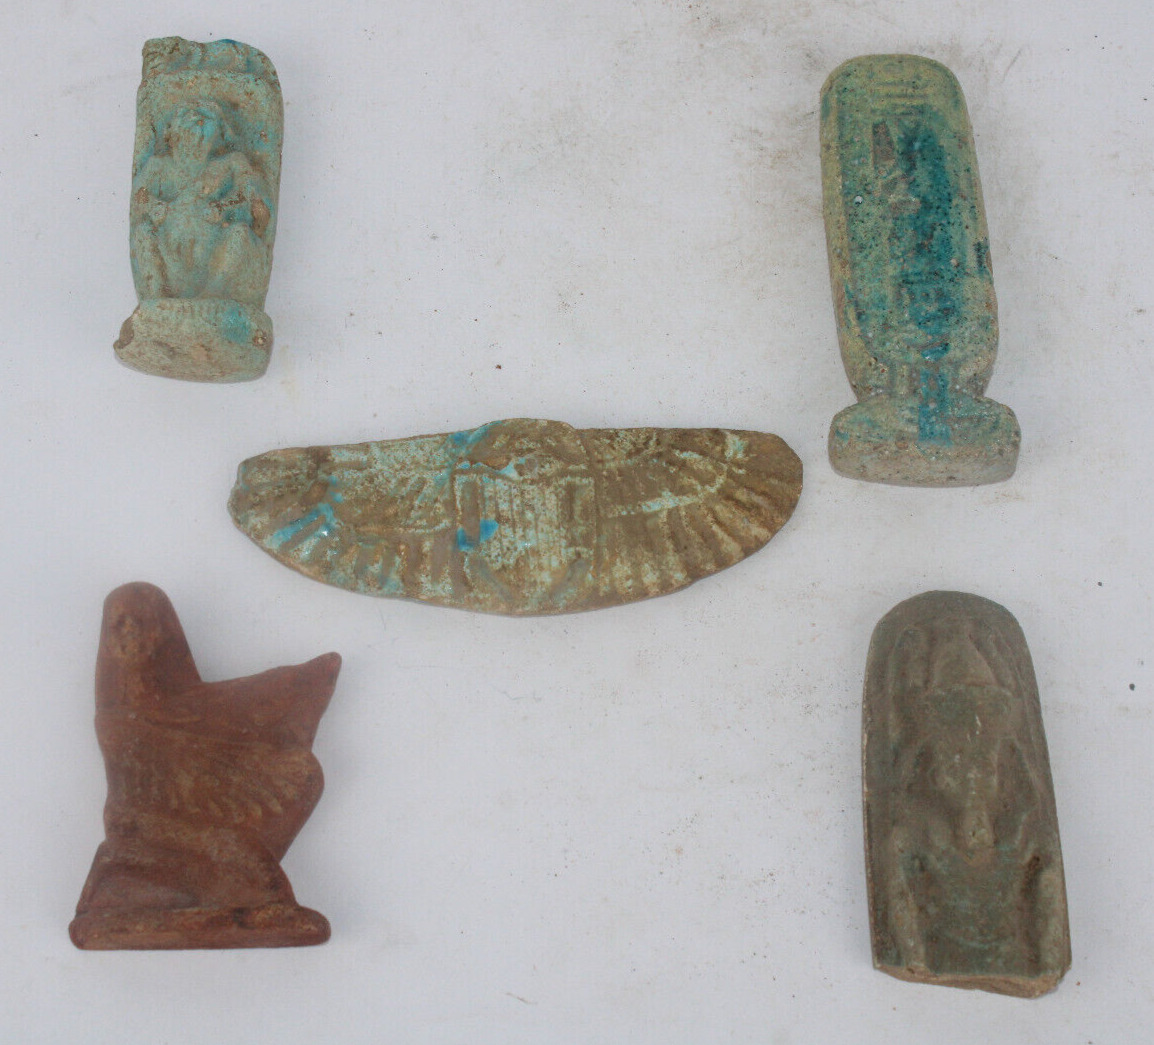 5 RARE ANCIENT EGYPTIAN PHARAONIC ANTIQUE Amulets Statues (BS)